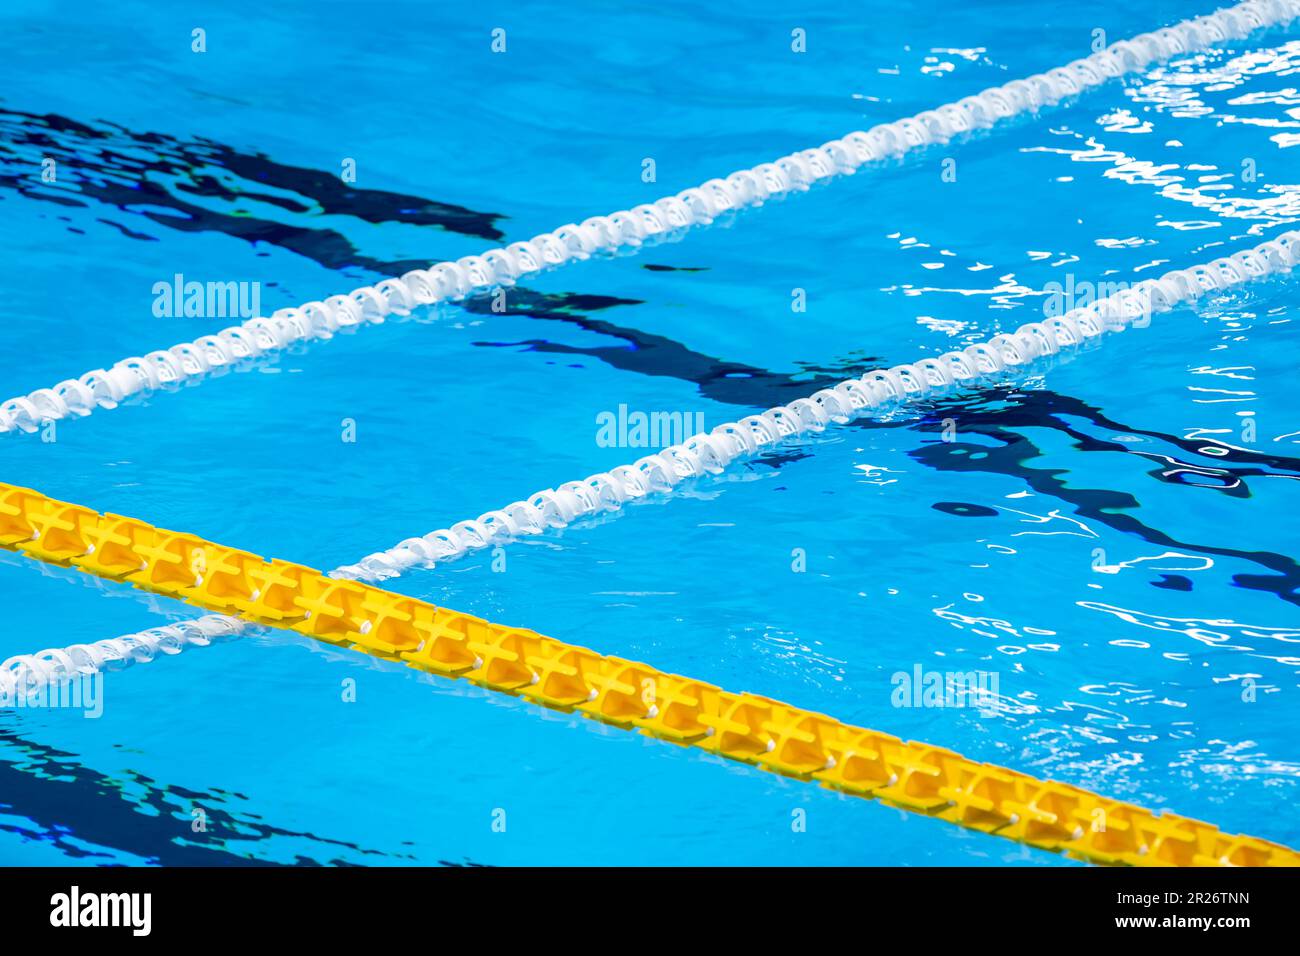 The view of an empty public swimming pool indoors. Lanes of a competition swimming pool. Horizontal sport theme poster, greeting cards, headers, websi Stock Photo